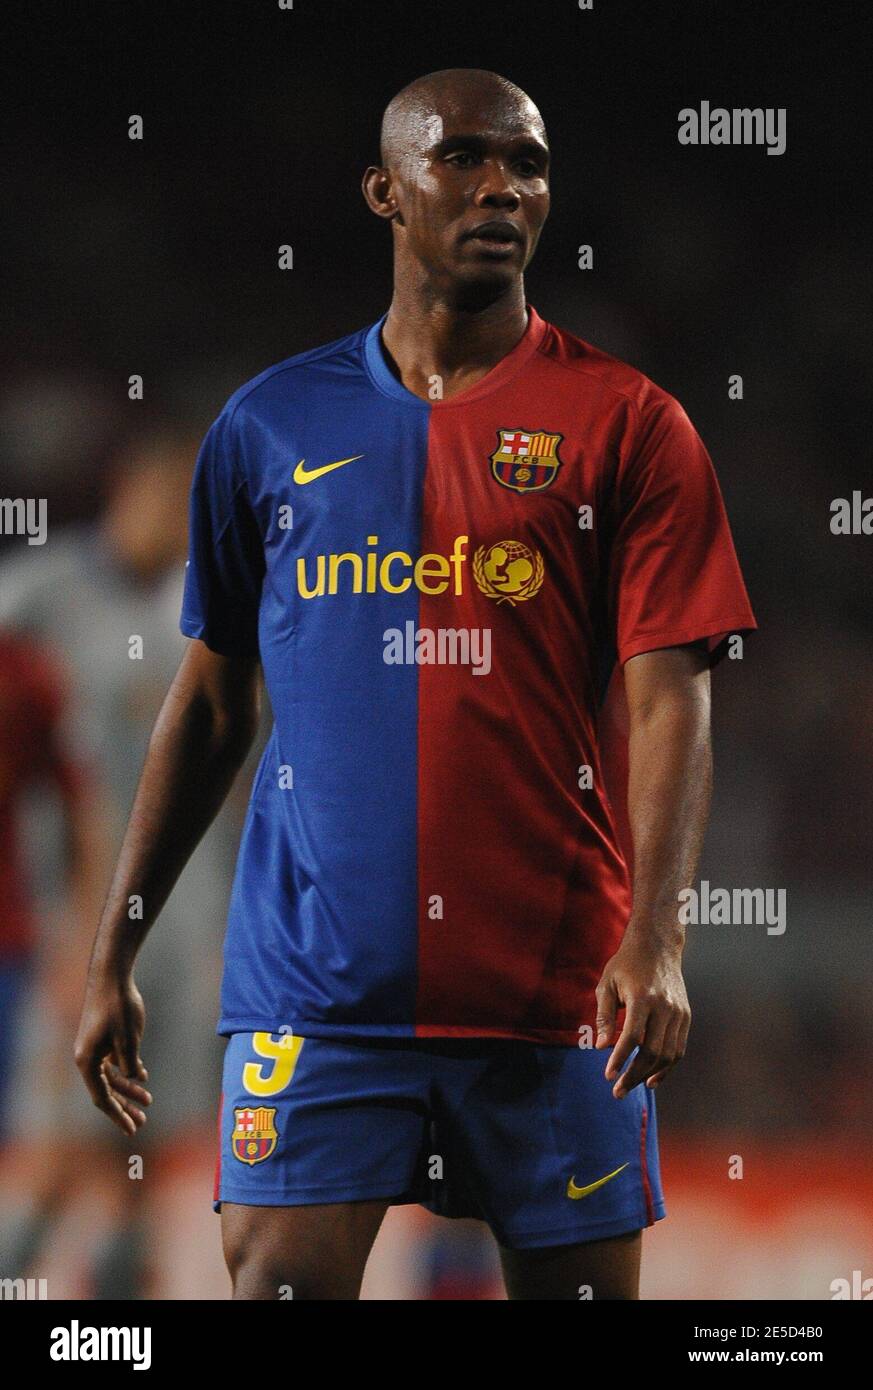 Barcelona's Samuel Eto'o during a Champions League Soccer match, FC  Barcelona vs Basel at the Camp Nou stadium in Barcelona, Spain on November  4, 2008. The match ended in a 1-1 draw.